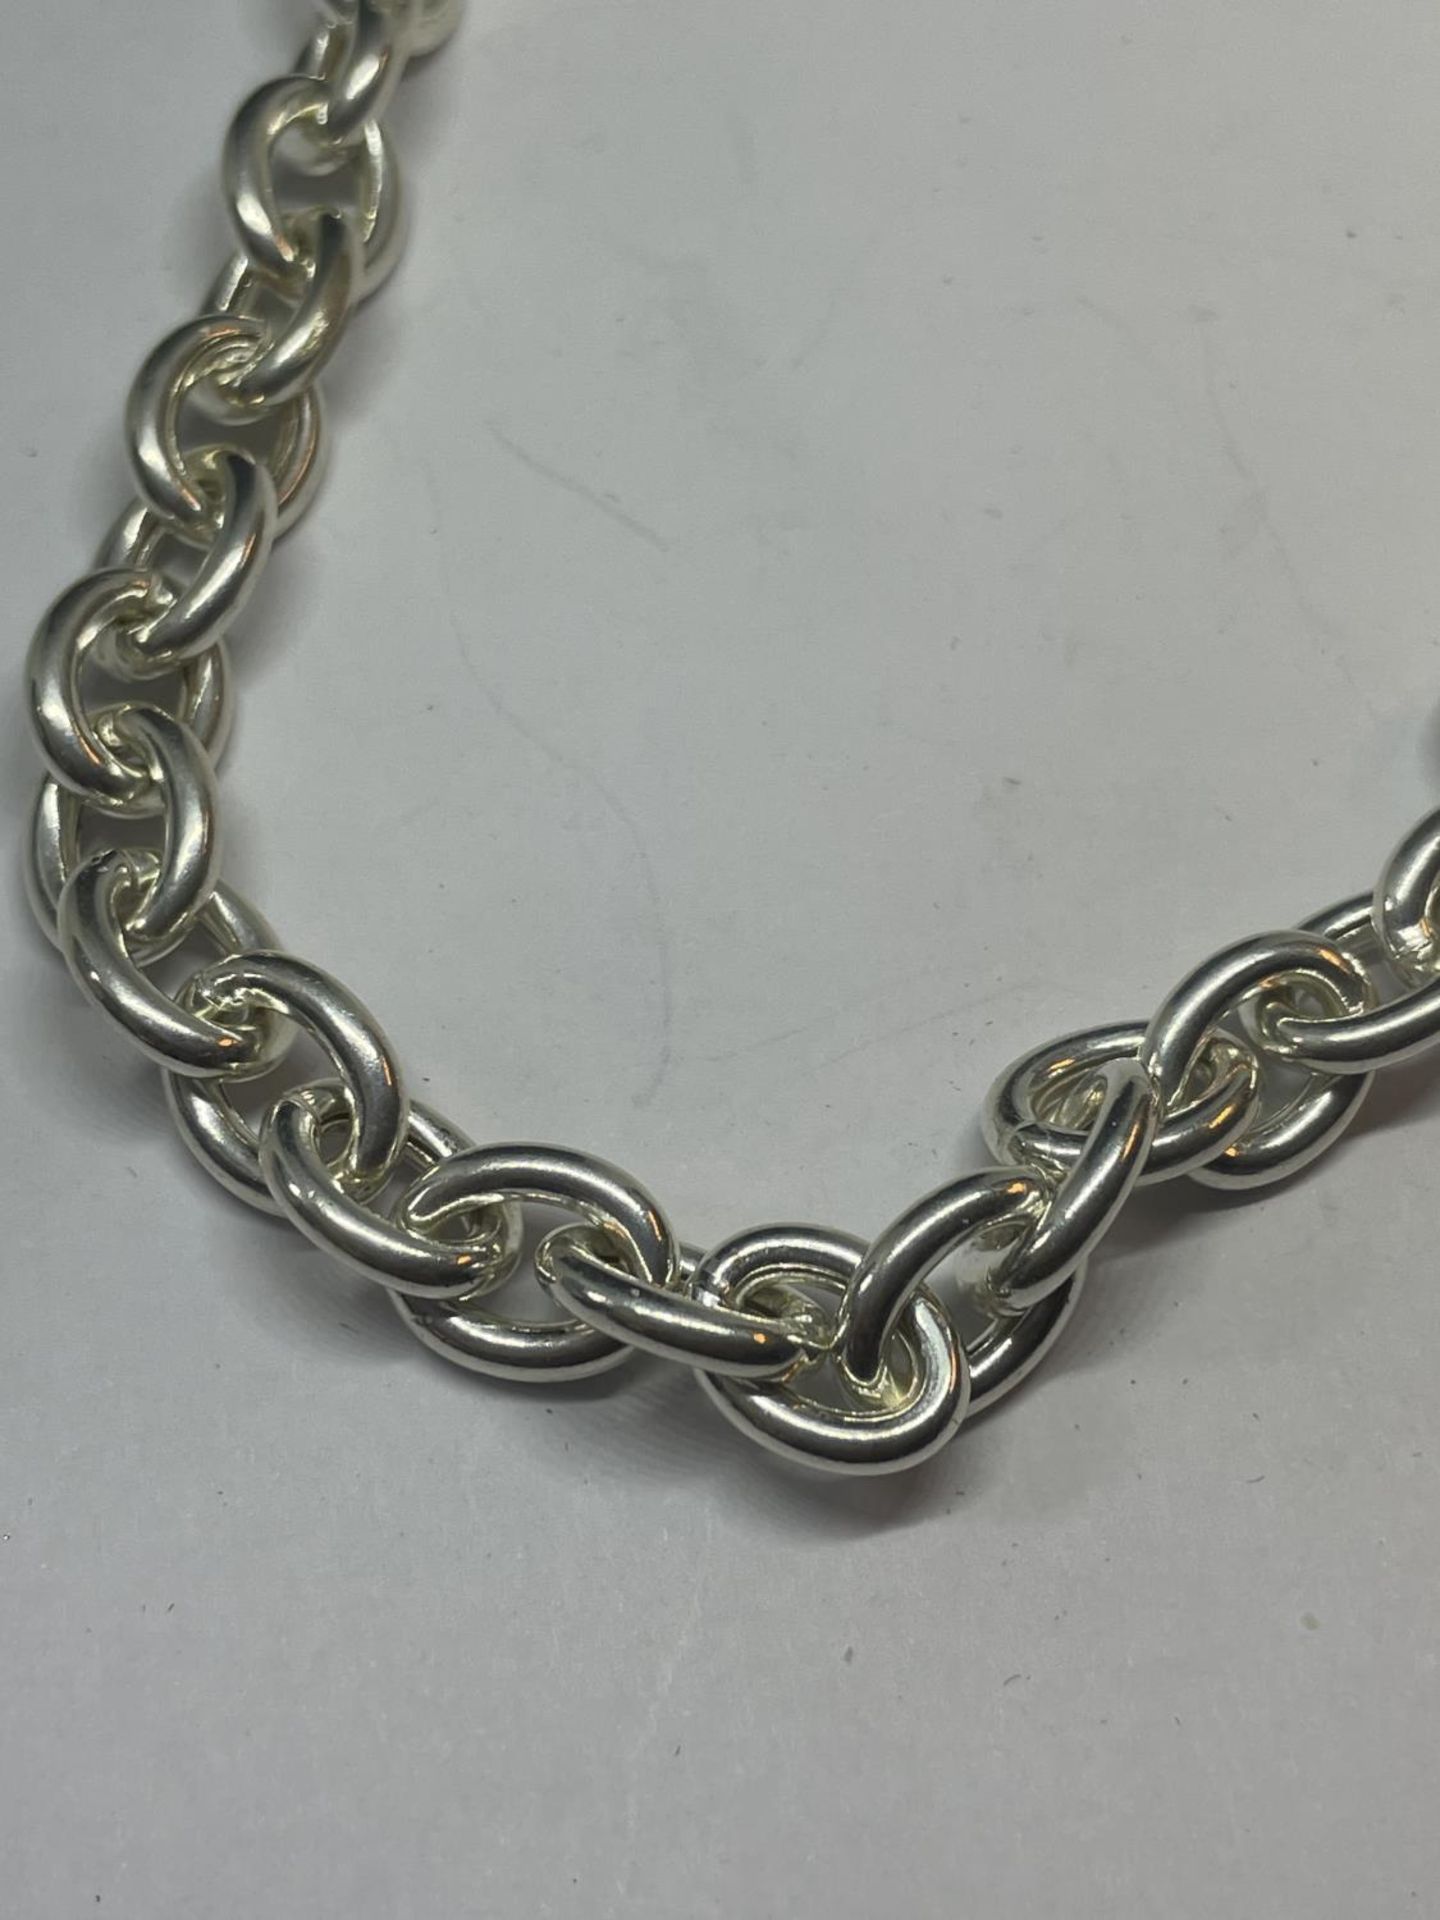 A SILVER T BAR NECK CHAIN LENGTH 18" - Image 2 of 3